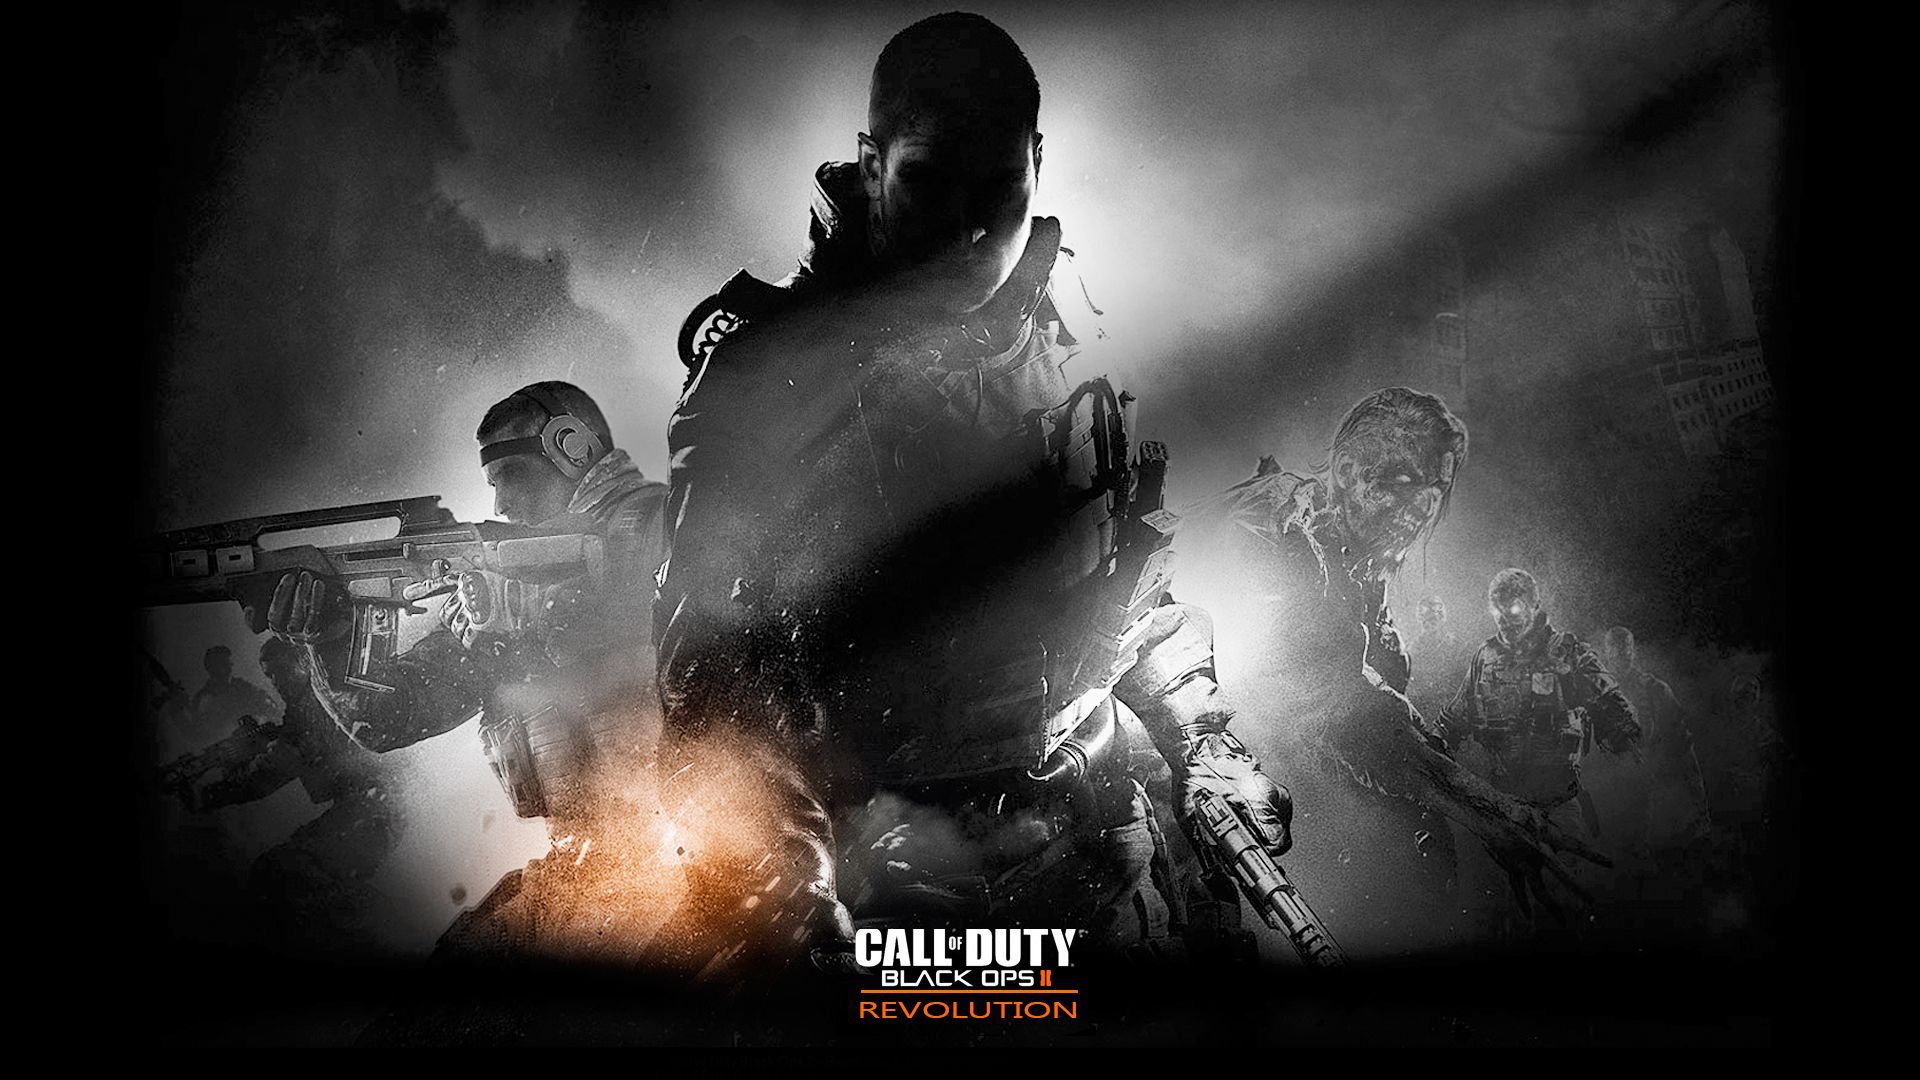 Call Of Duty Black Ops 2 Revolution Wallpapers | HD Wallpapers